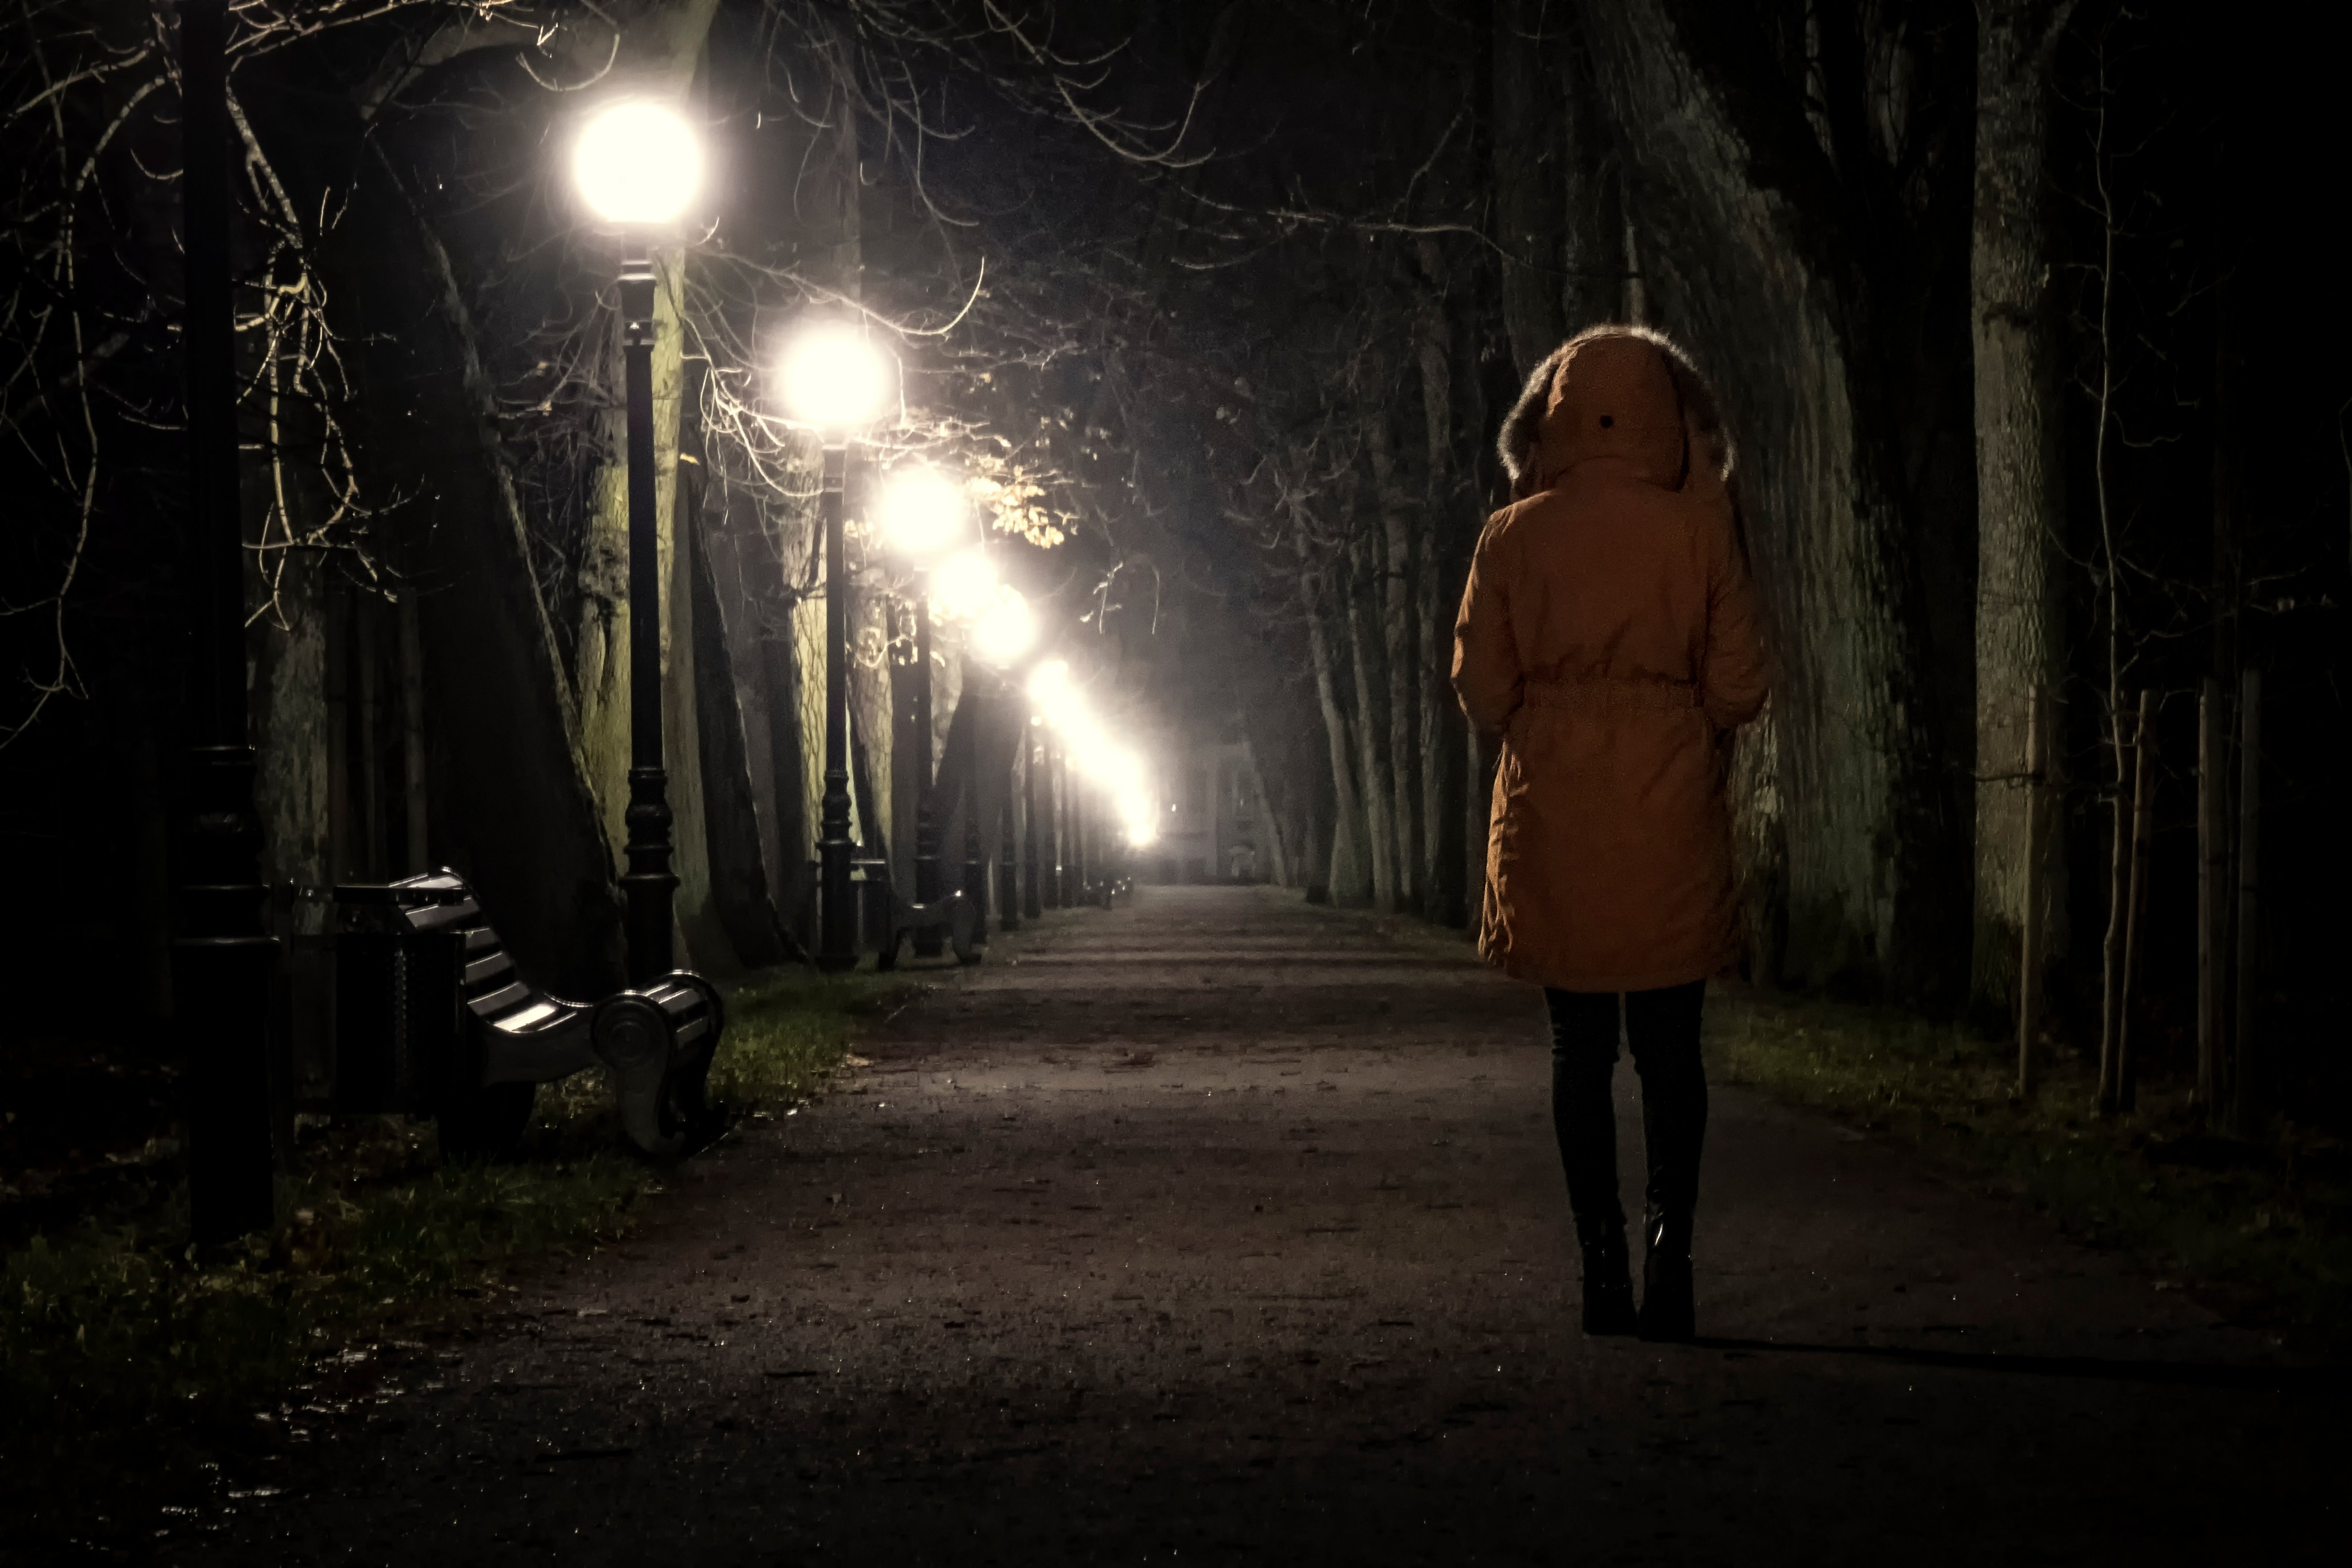 A photograph of a woman walking through a park at night